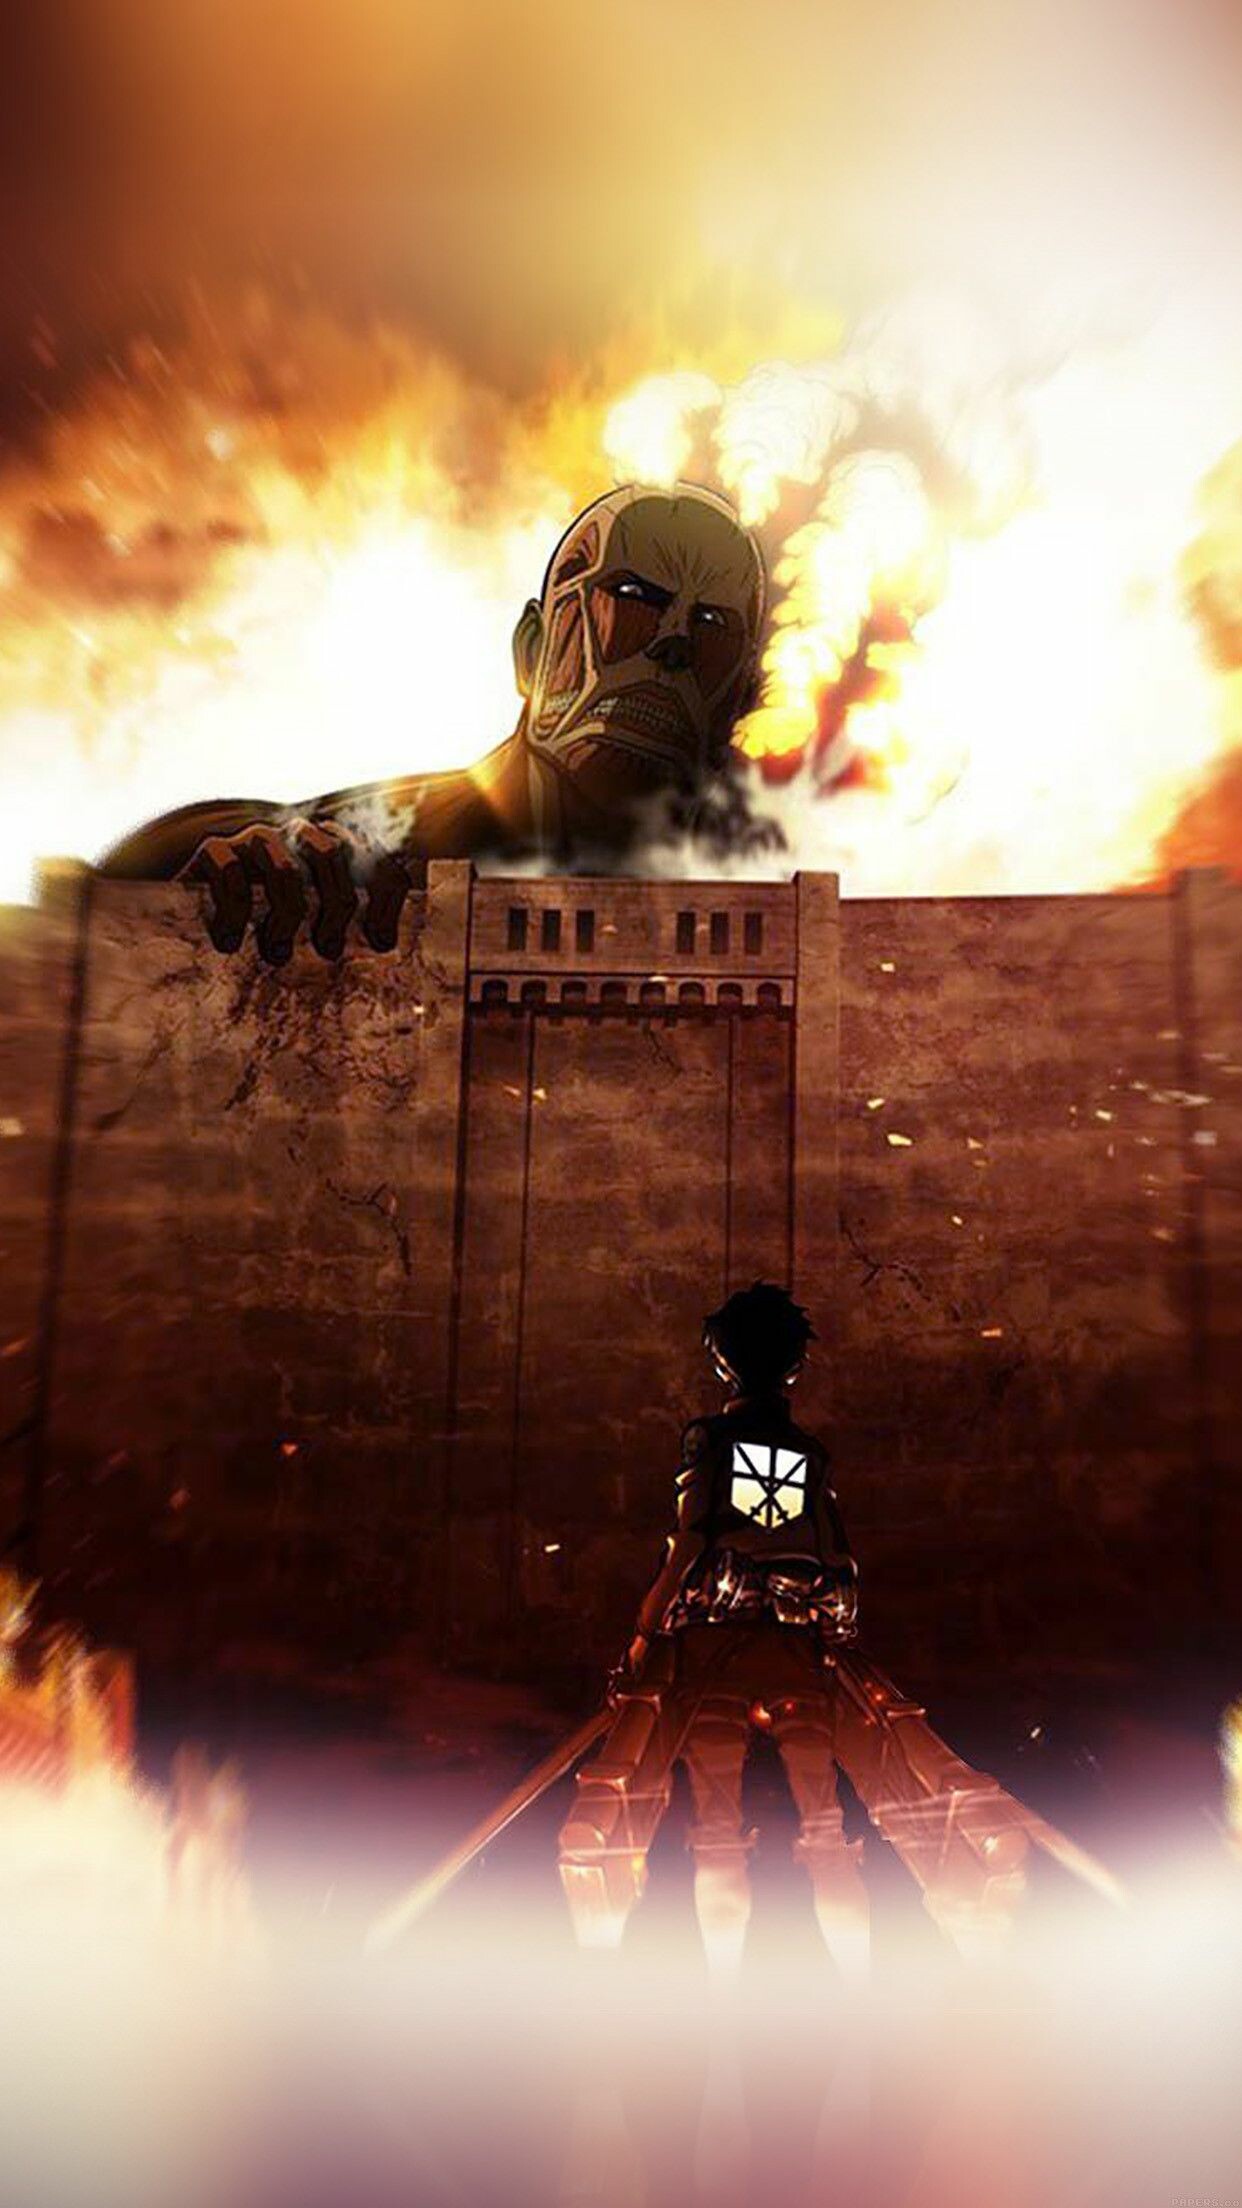 Attack on Titan (TV Series): AOT, A species of giant, man-eating humanoids. 1250x2210 HD Wallpaper.